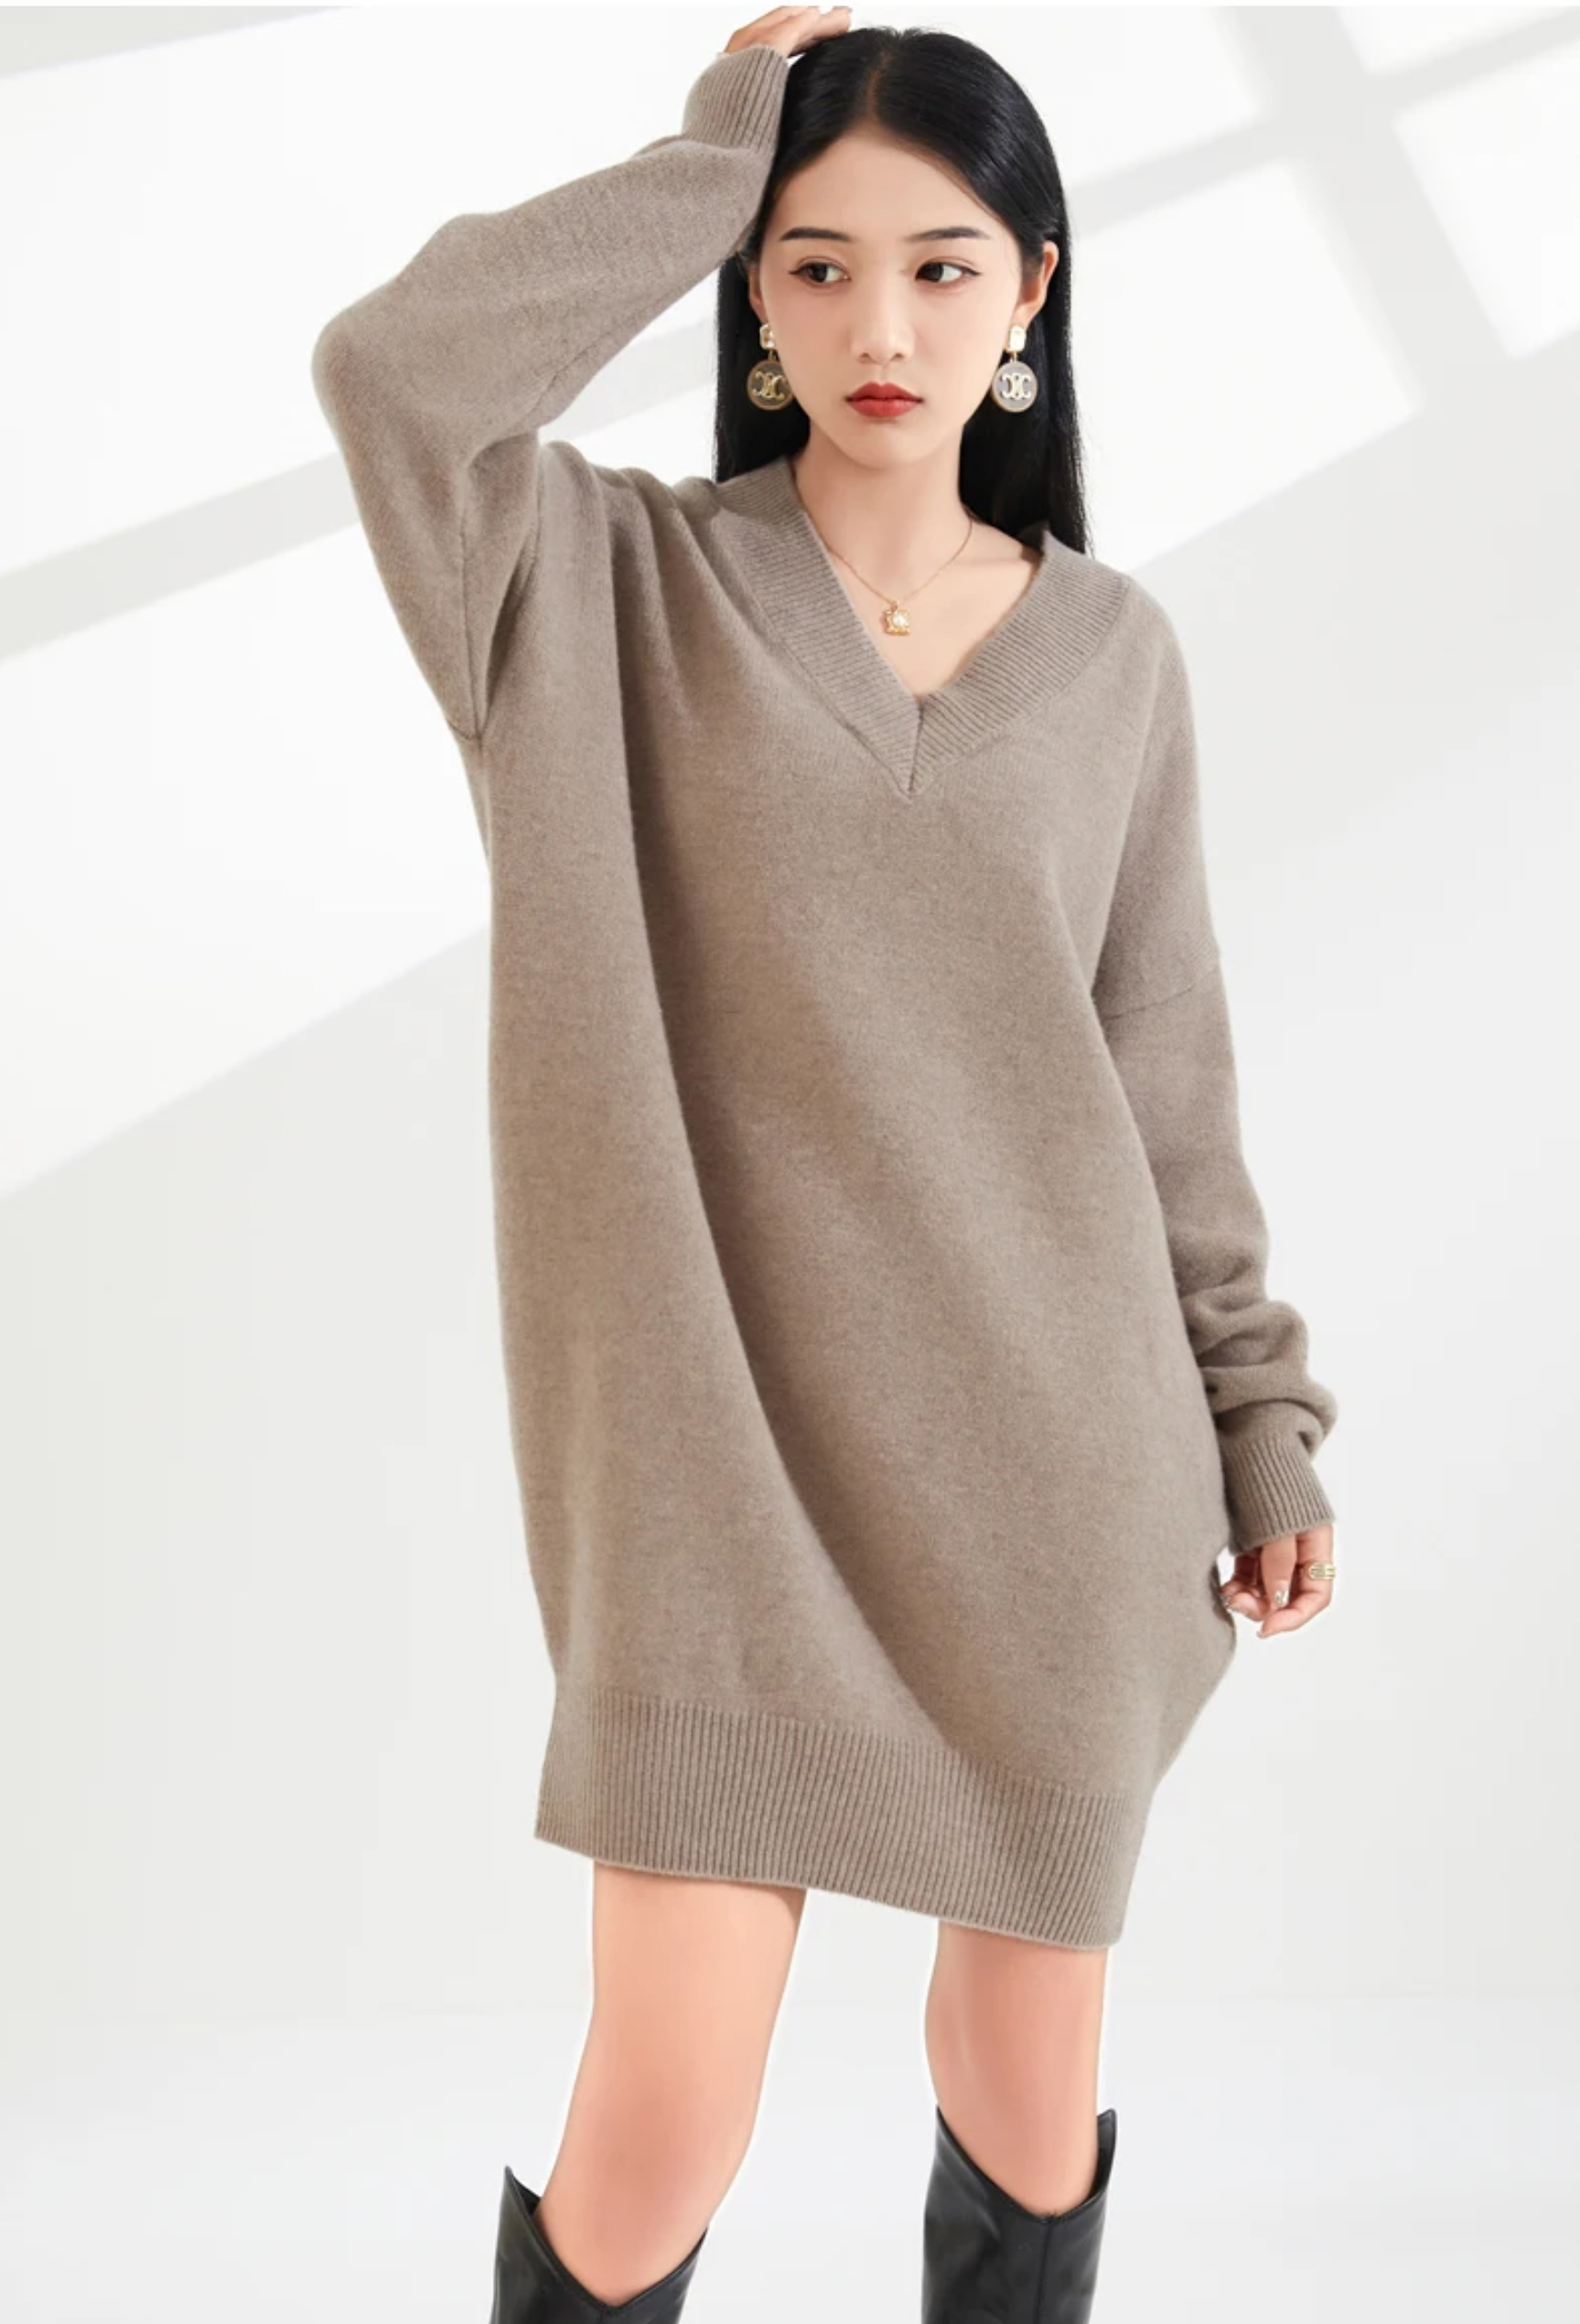 Escriva Sweater Dress Woman's Winter Spring Thick Long Sleeves V-Neck Female Pullover Loose Large Size Tops 100% Woolen Knitted womens Jumper Sweater Dresses for Woman in beige brown